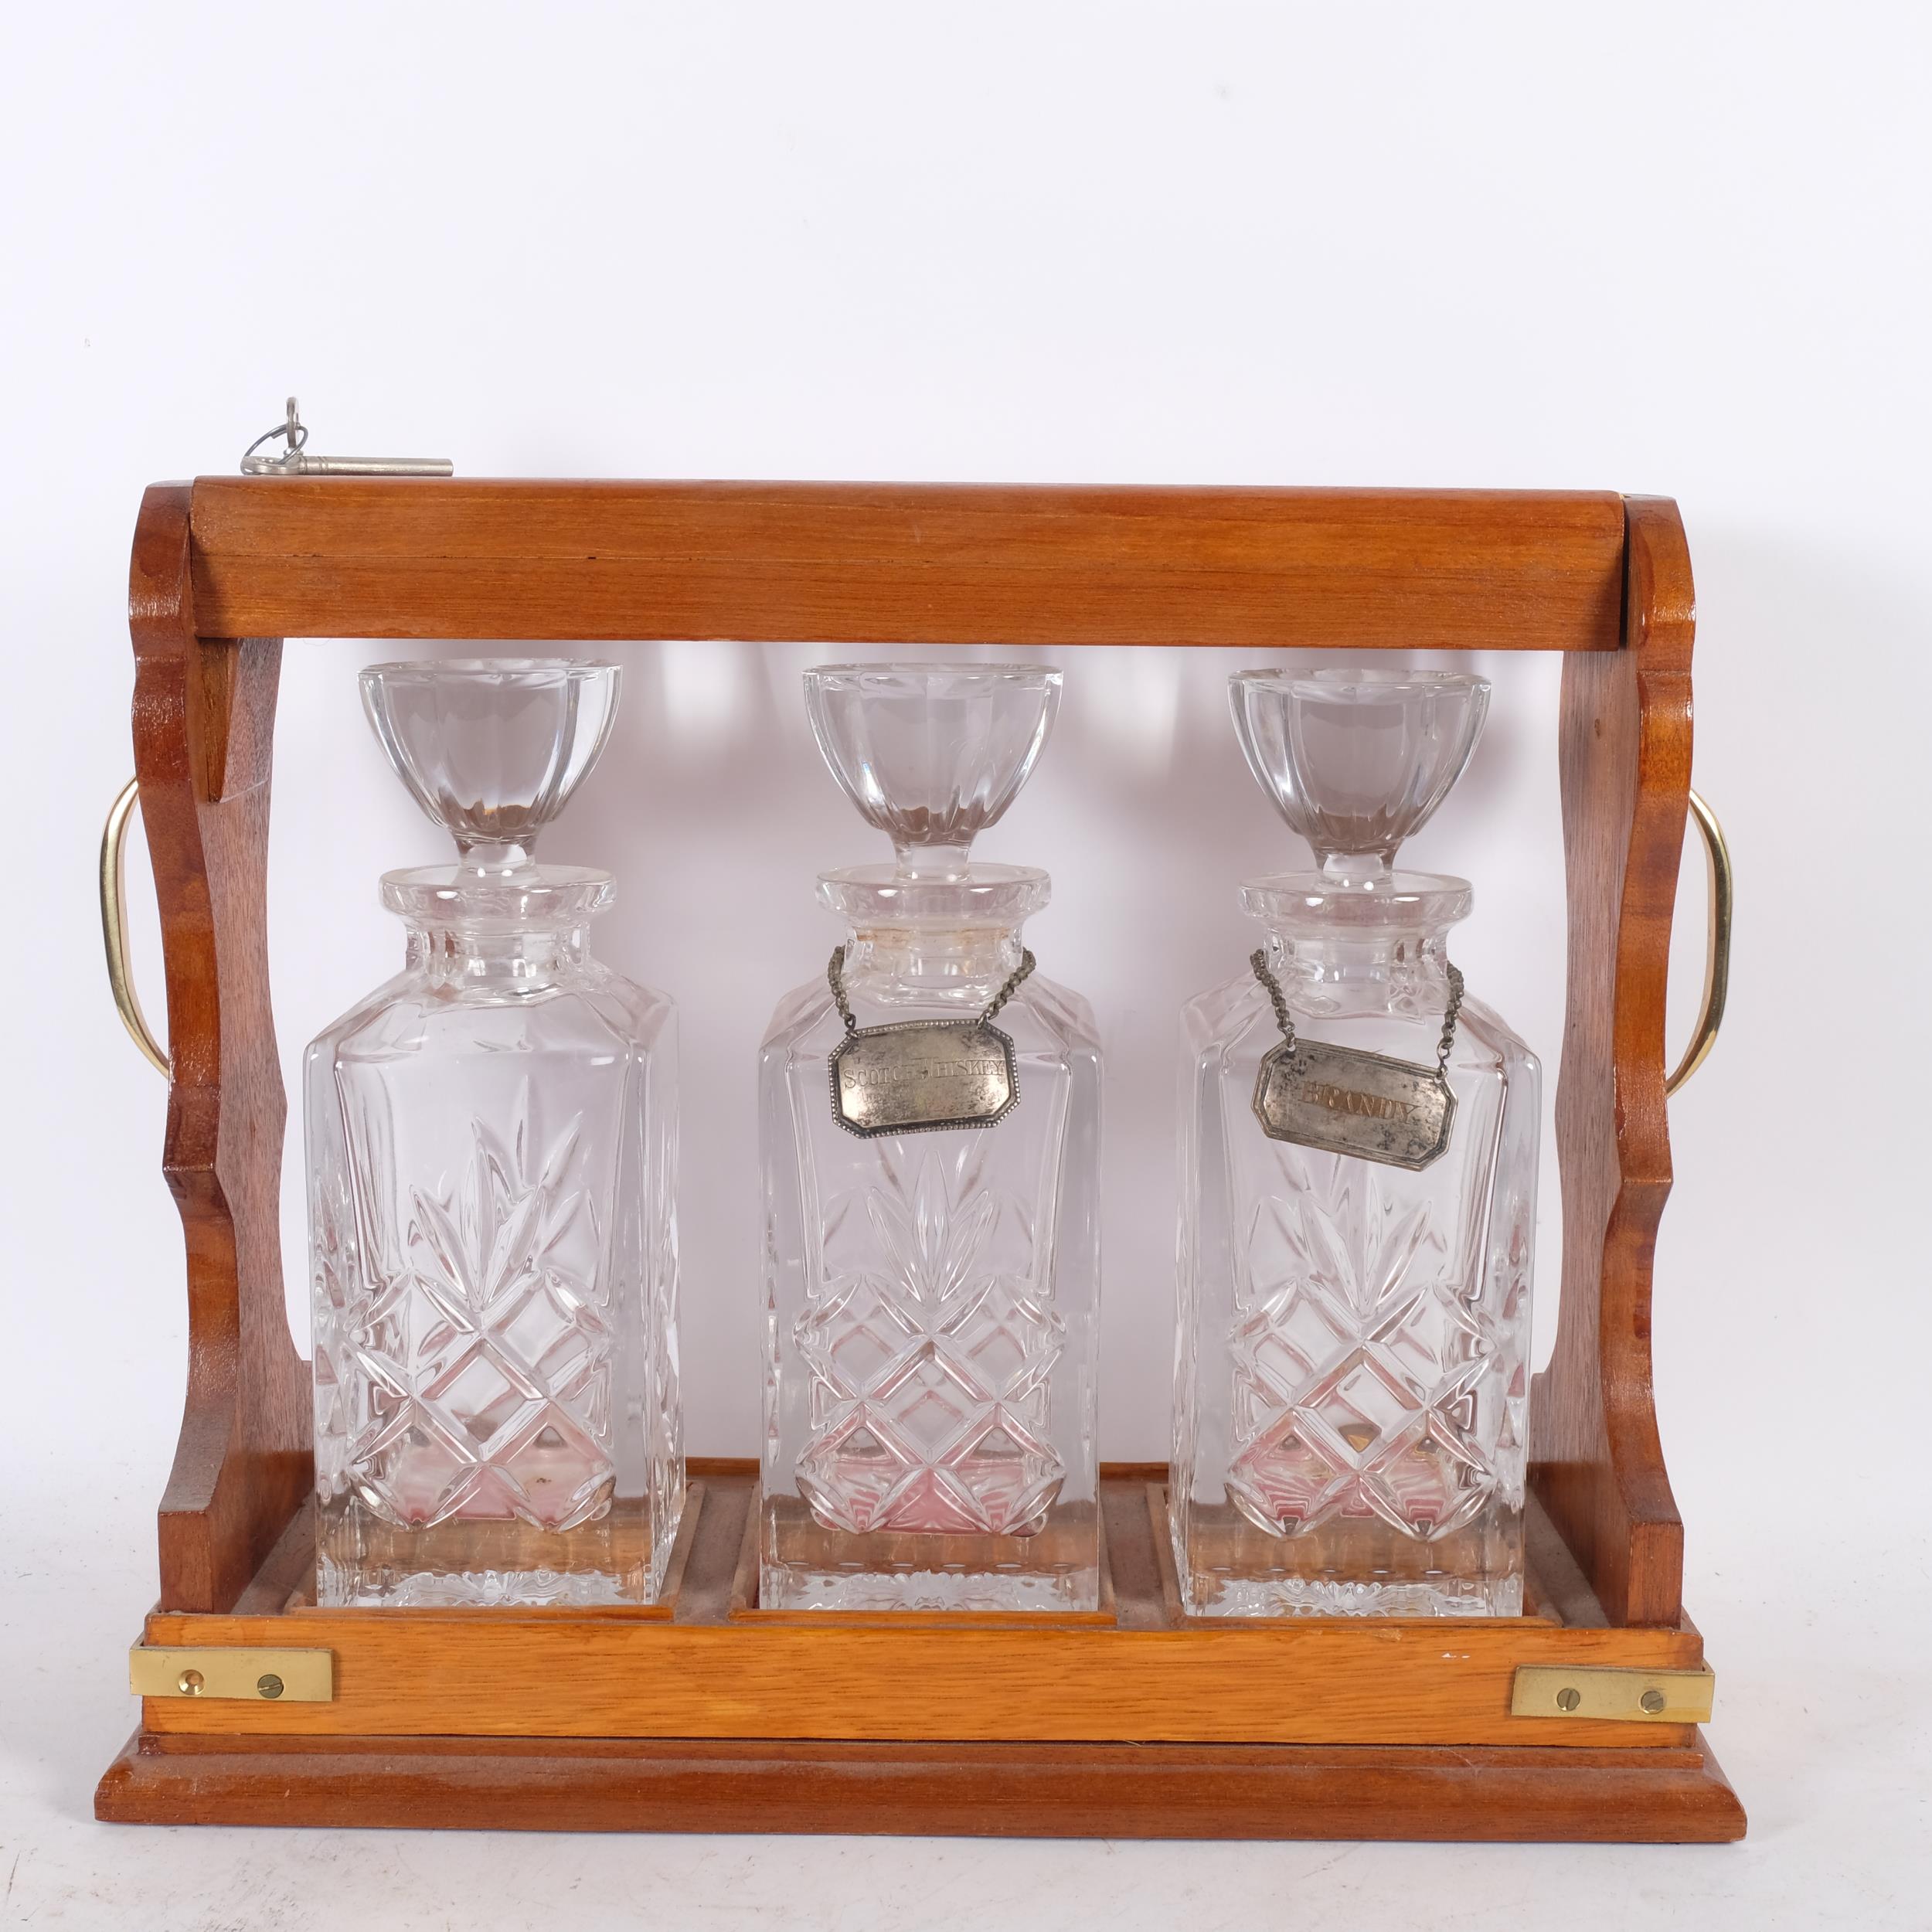 An oak 3-bottle tantalus, with crystal decanters, and 2 silver plated labels, L41cm - Image 2 of 2